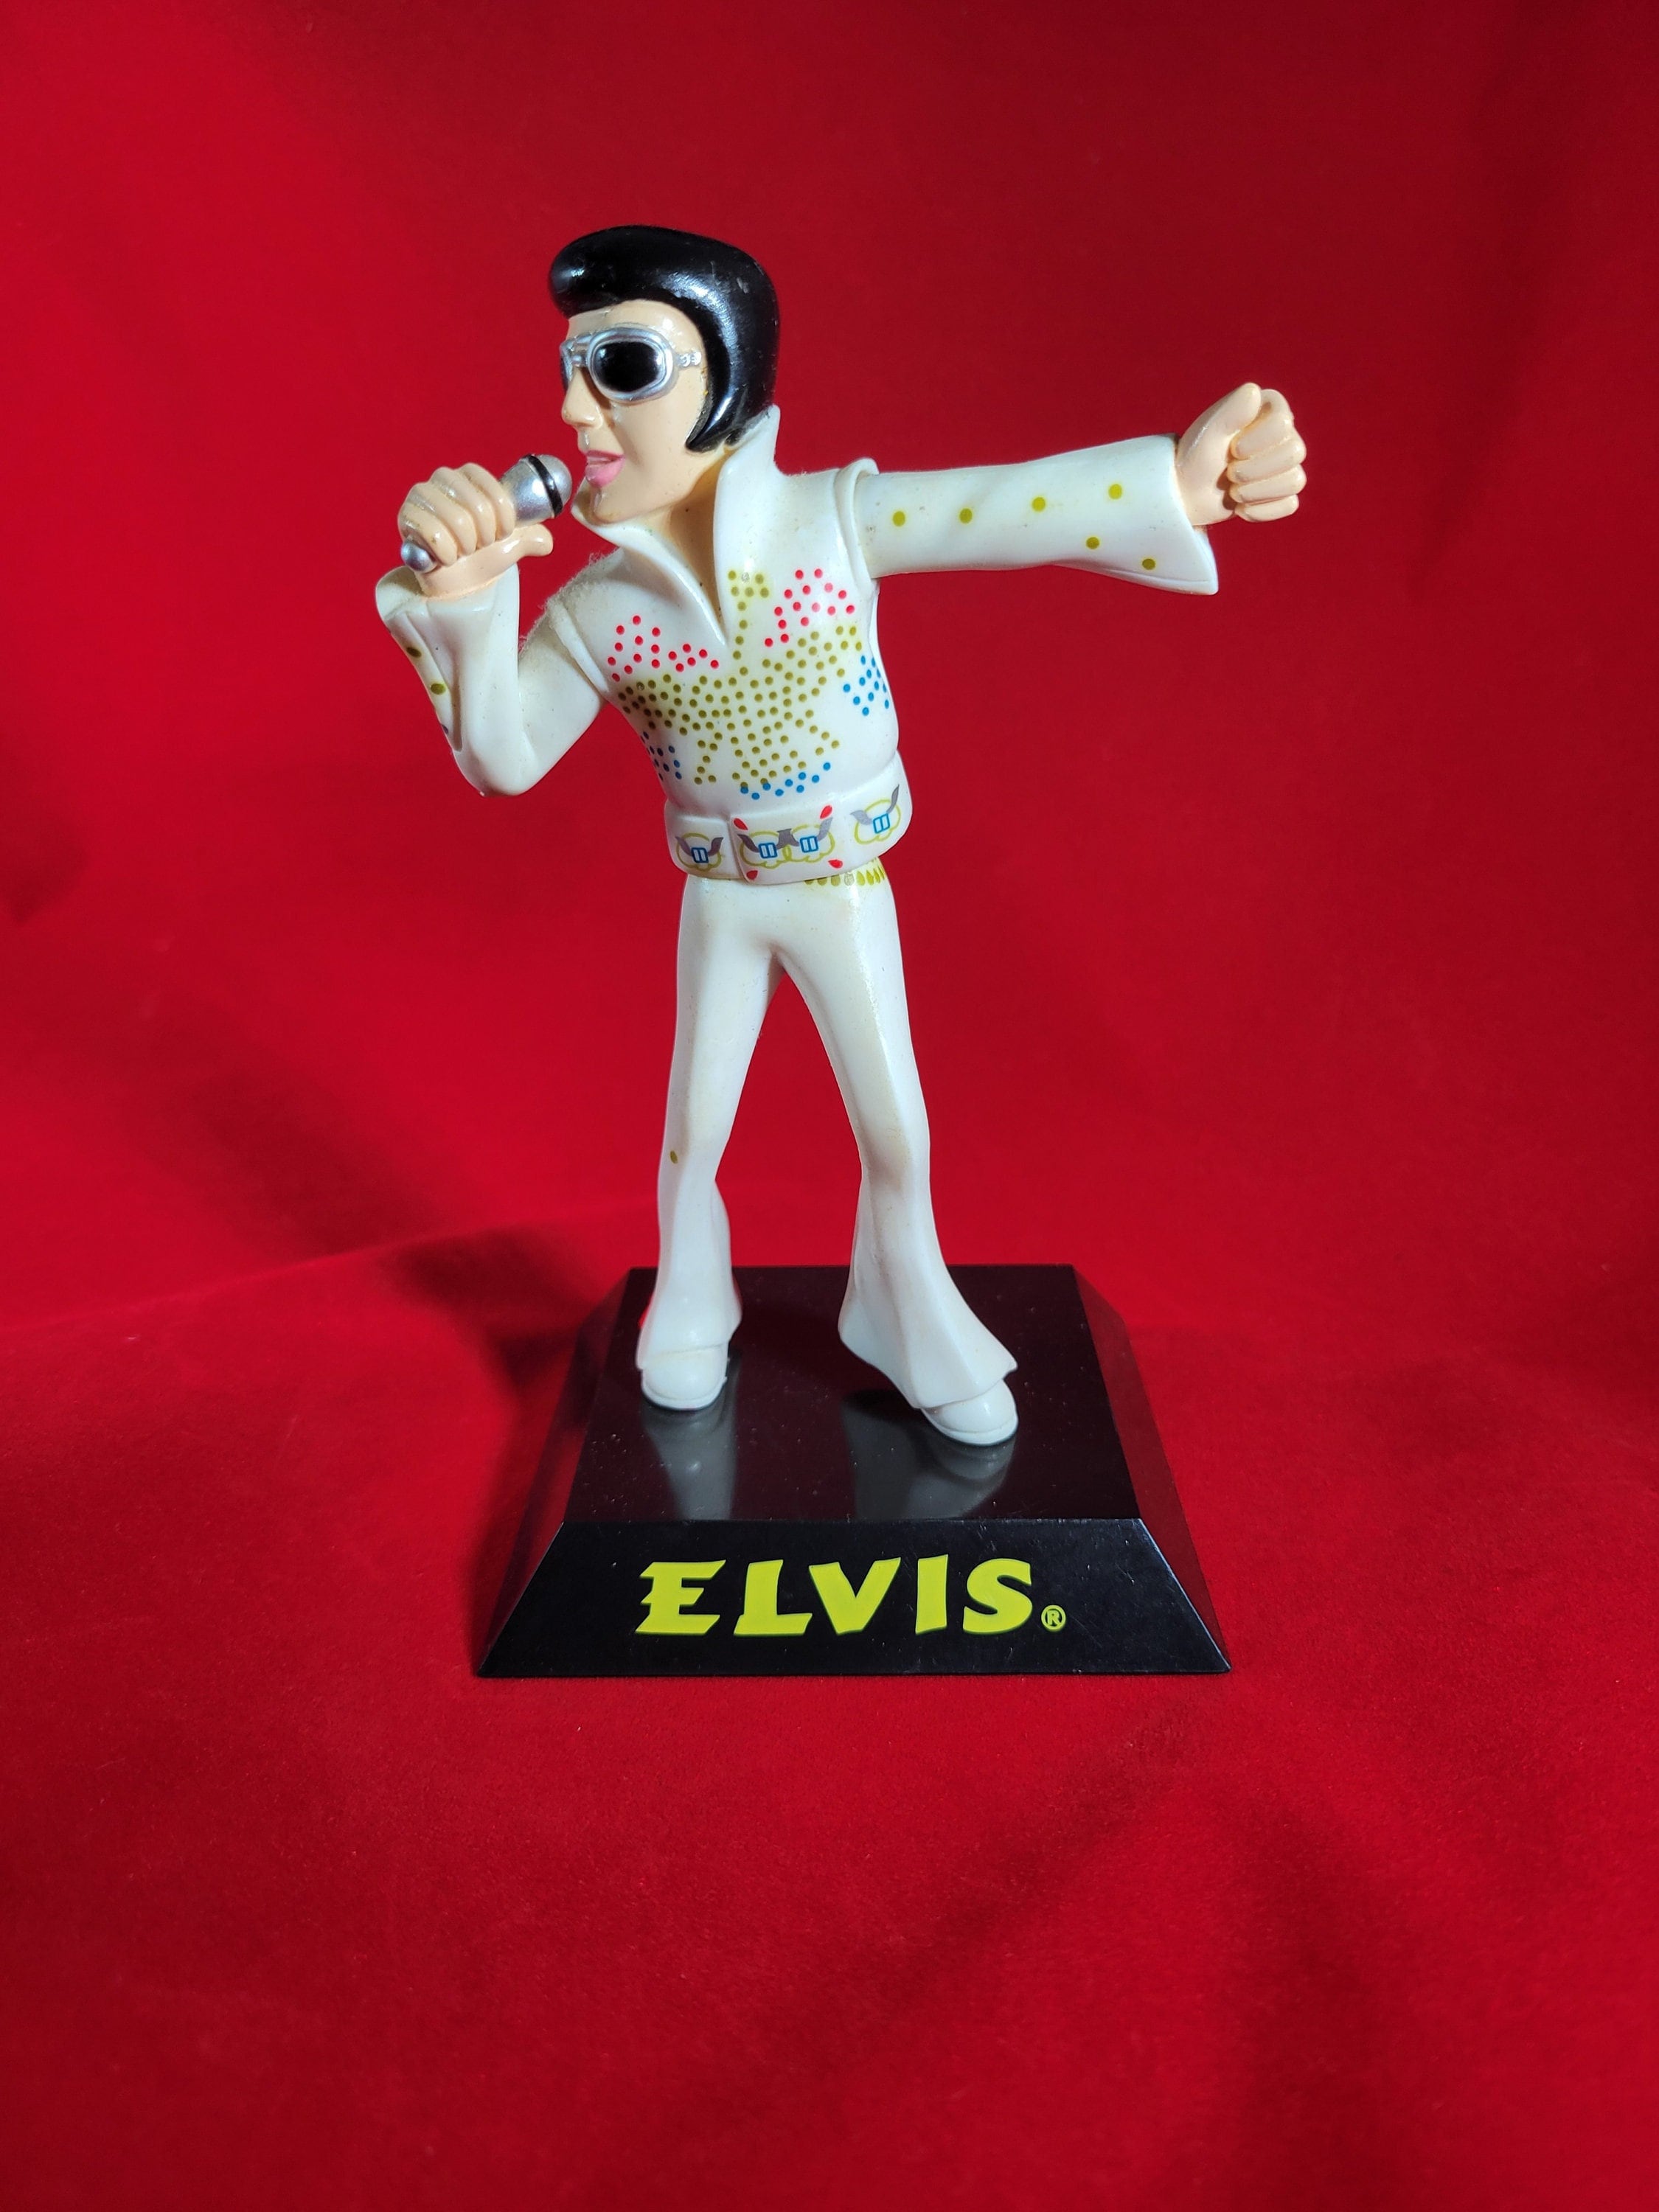 Vintage Wackel-Elvis Dashboard Figure, Wobbly Elvis Bobblehead Doll, Audi  Commercial figure, Made in Germany,E P E Official ProductPrototype